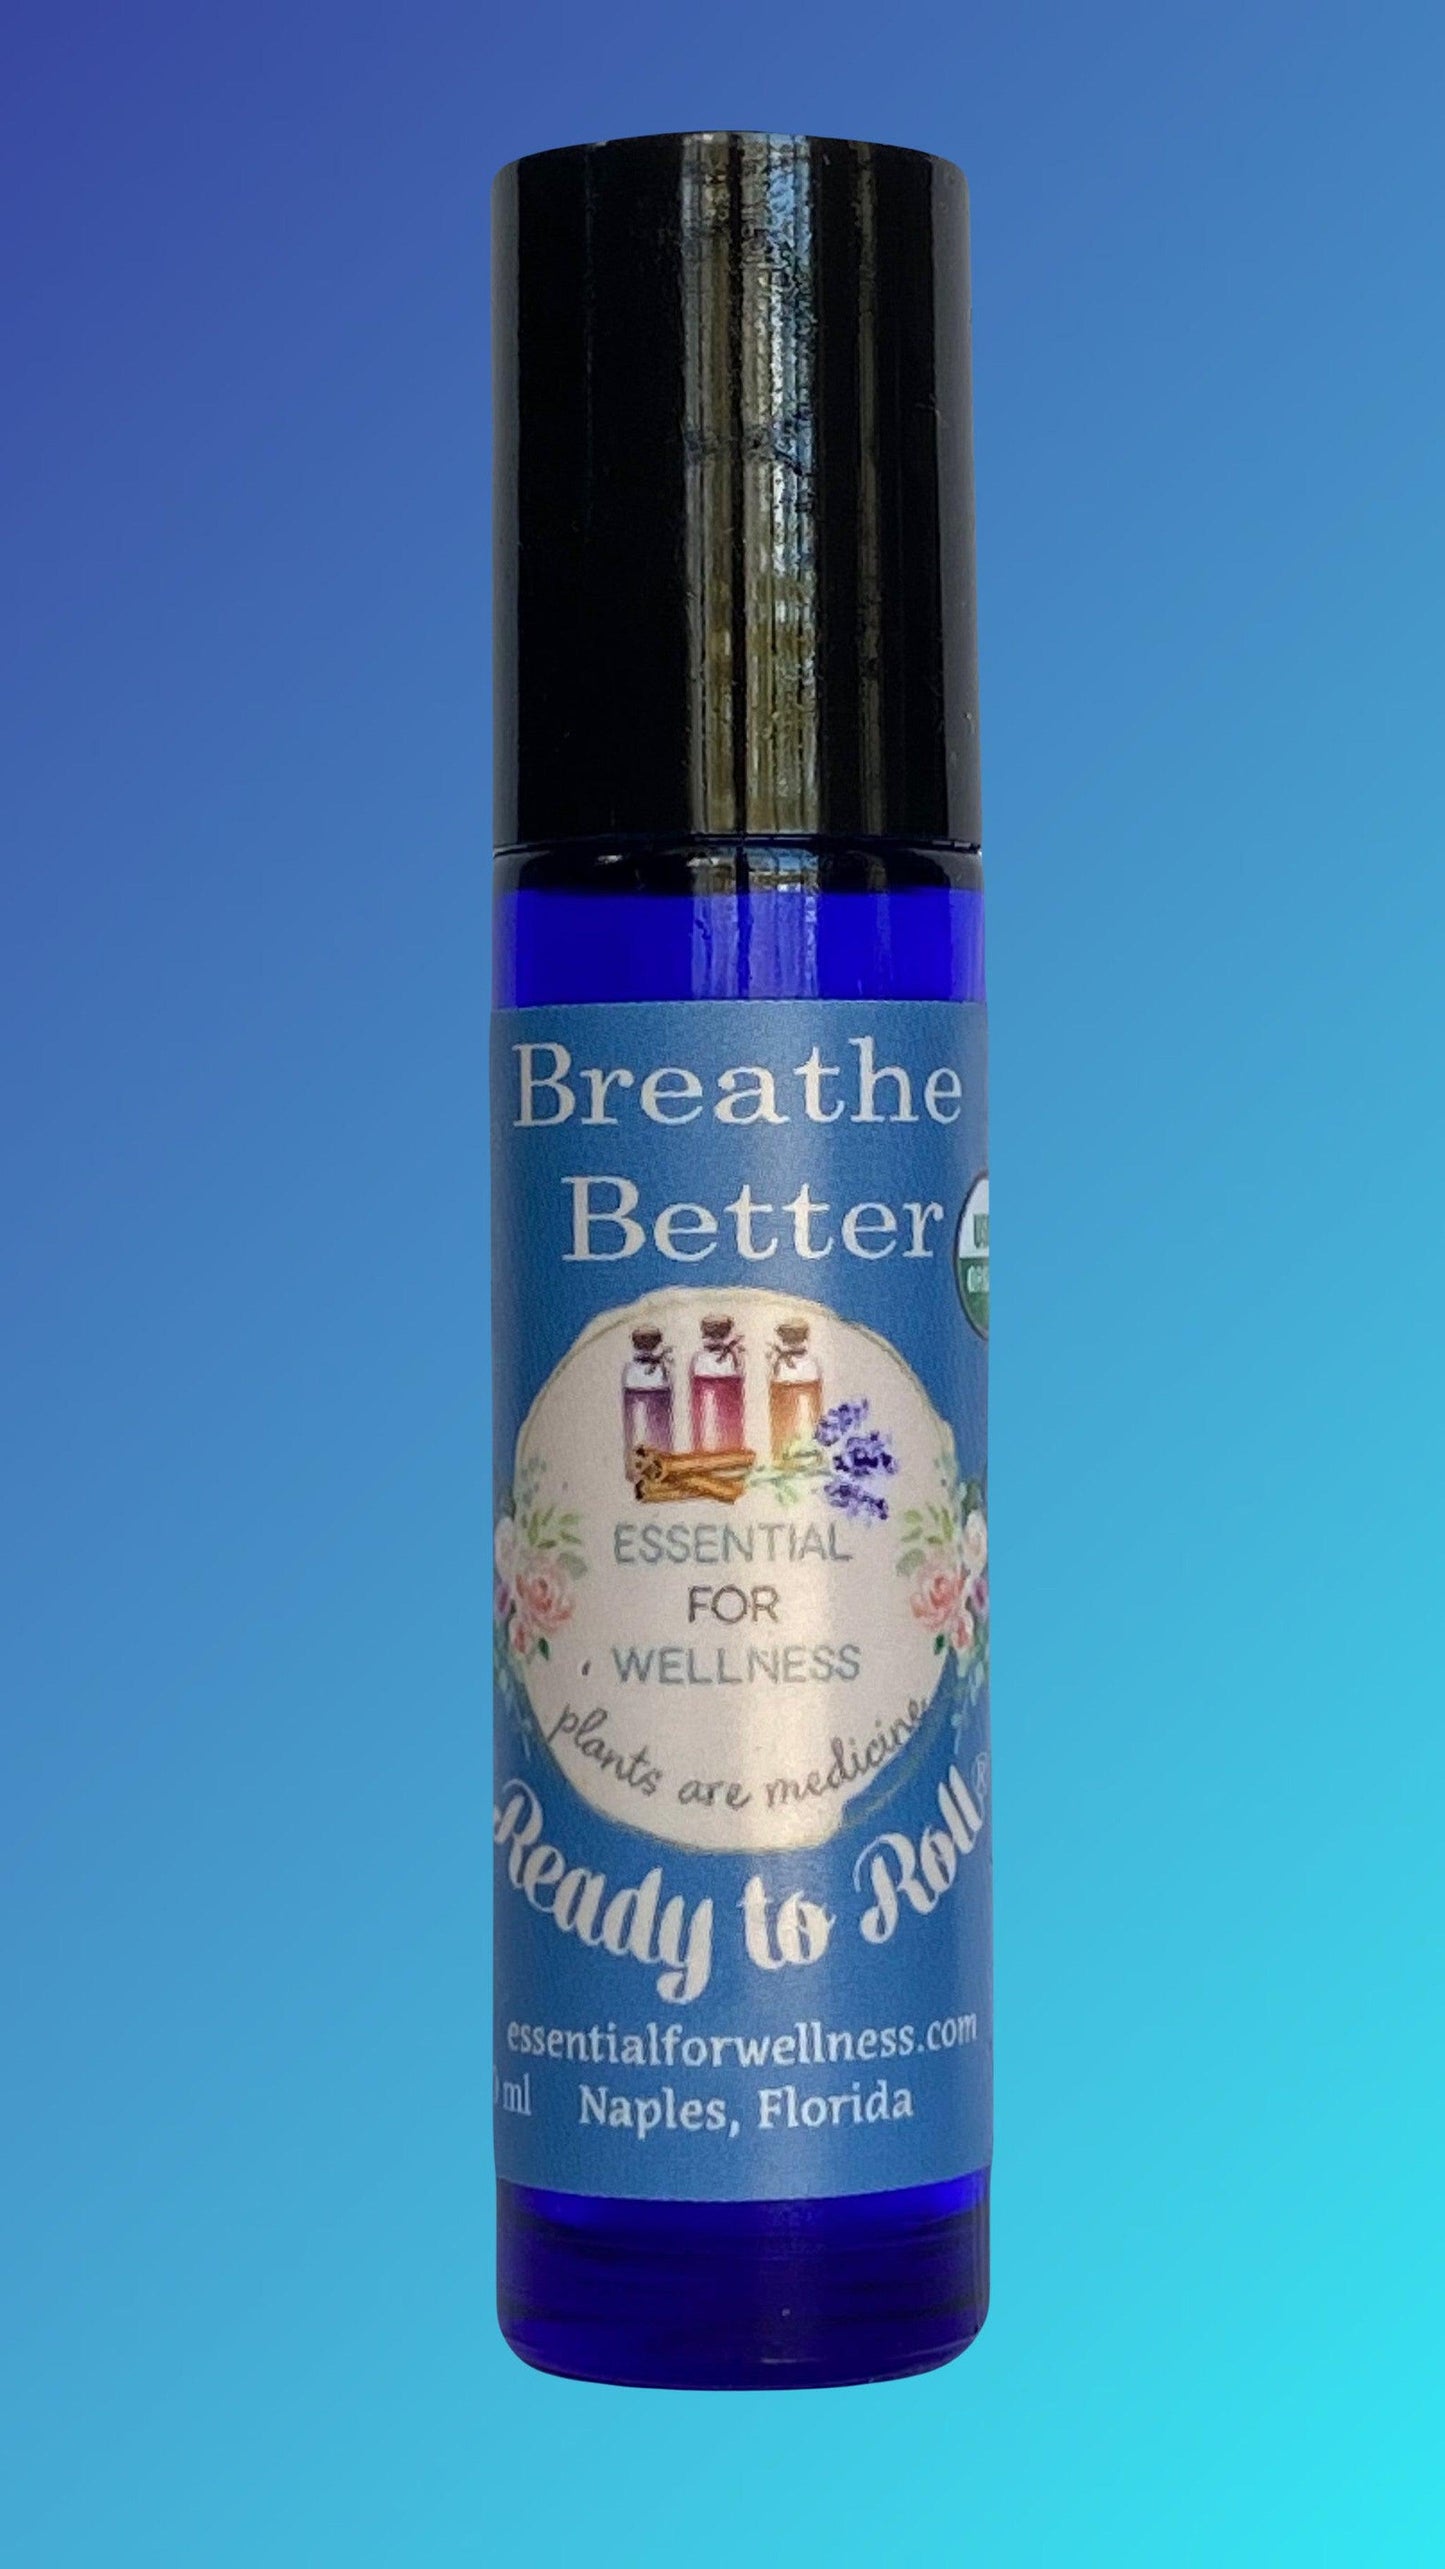 Ready to Roll® Breathe Better Organic Essential Oil Blends